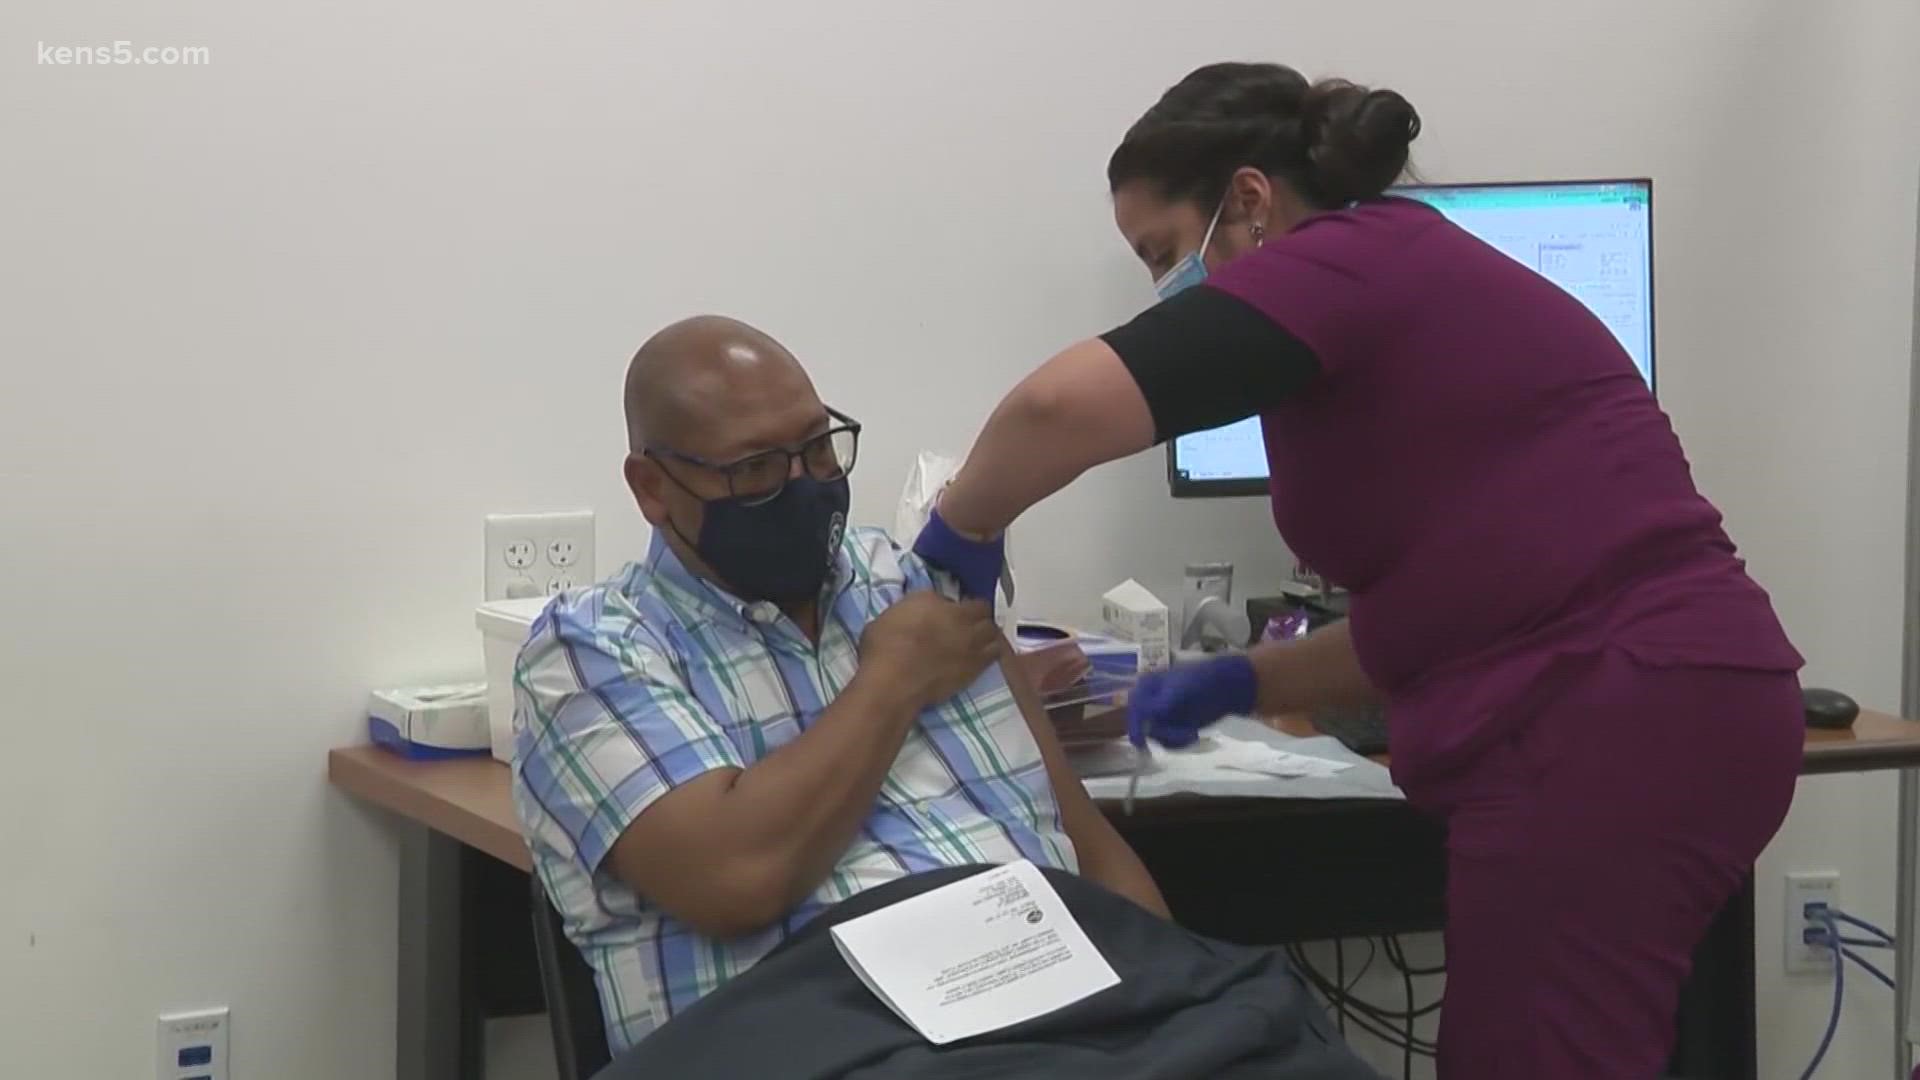 The FDA approved booster shots for the Pfizer vaccine for people 65 and older. Qualifying residents in Bexar County could soon know when they can get the shot.